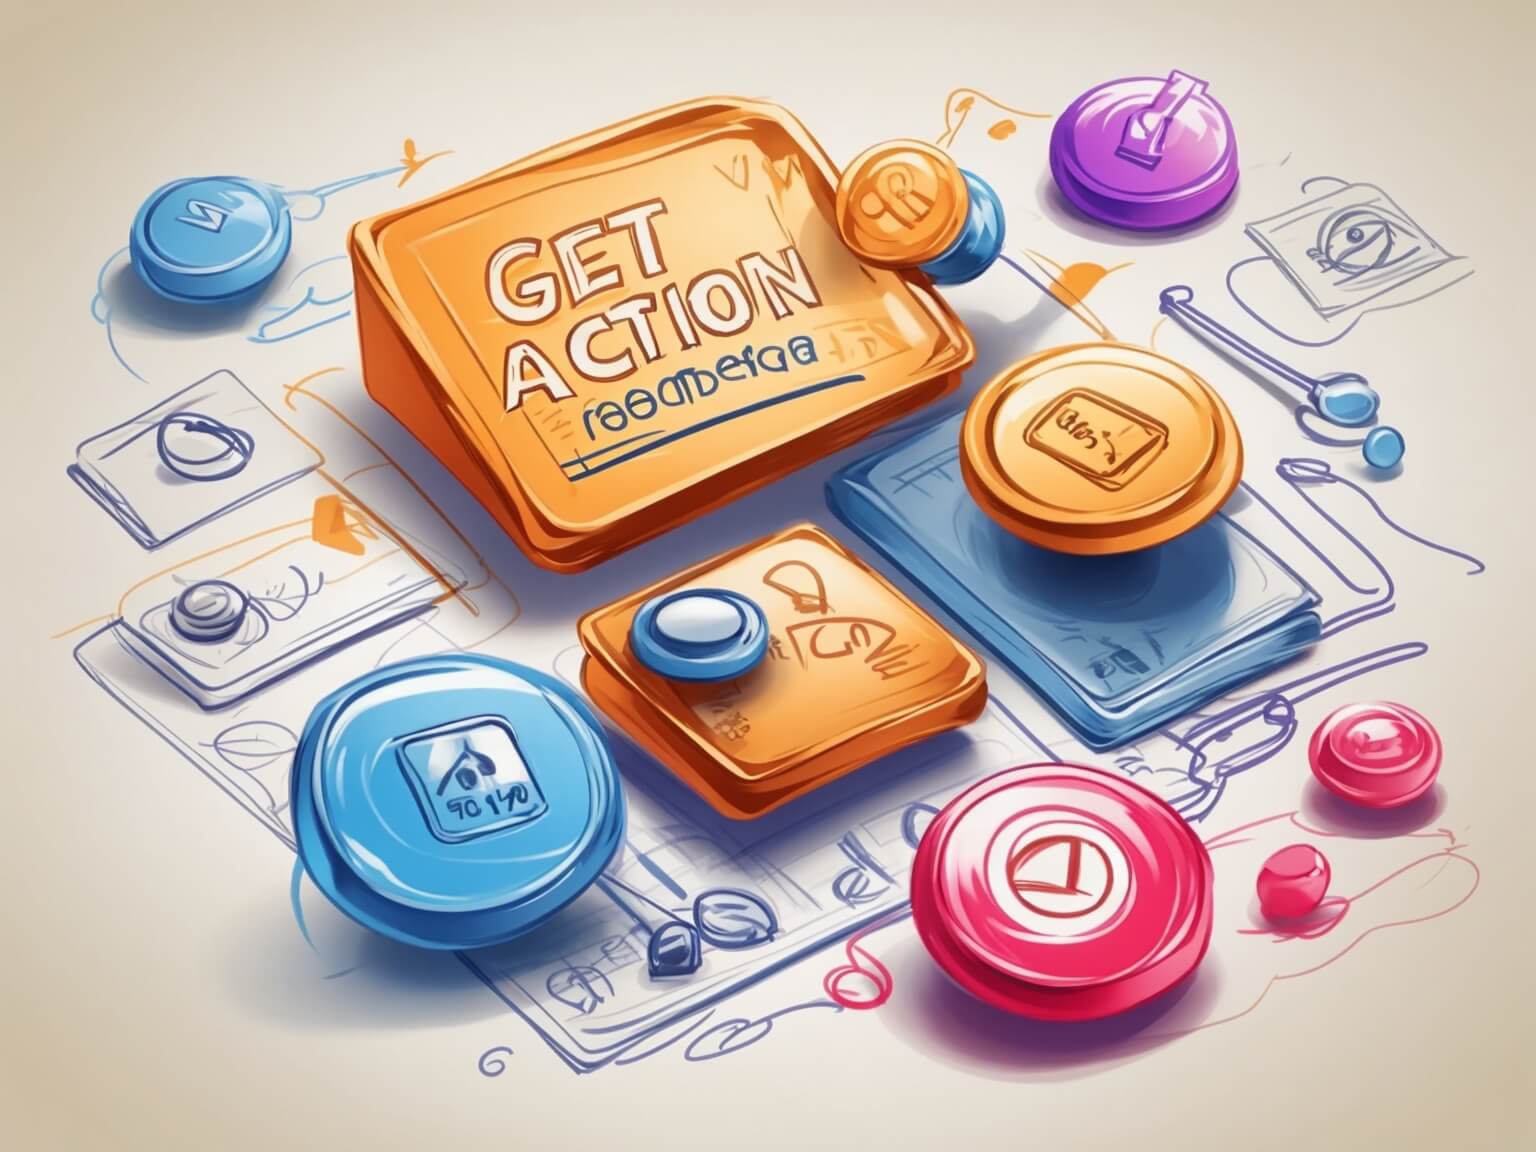 How to Get Users to Take Action on Your Website with Effective Call-to-Action Buttons